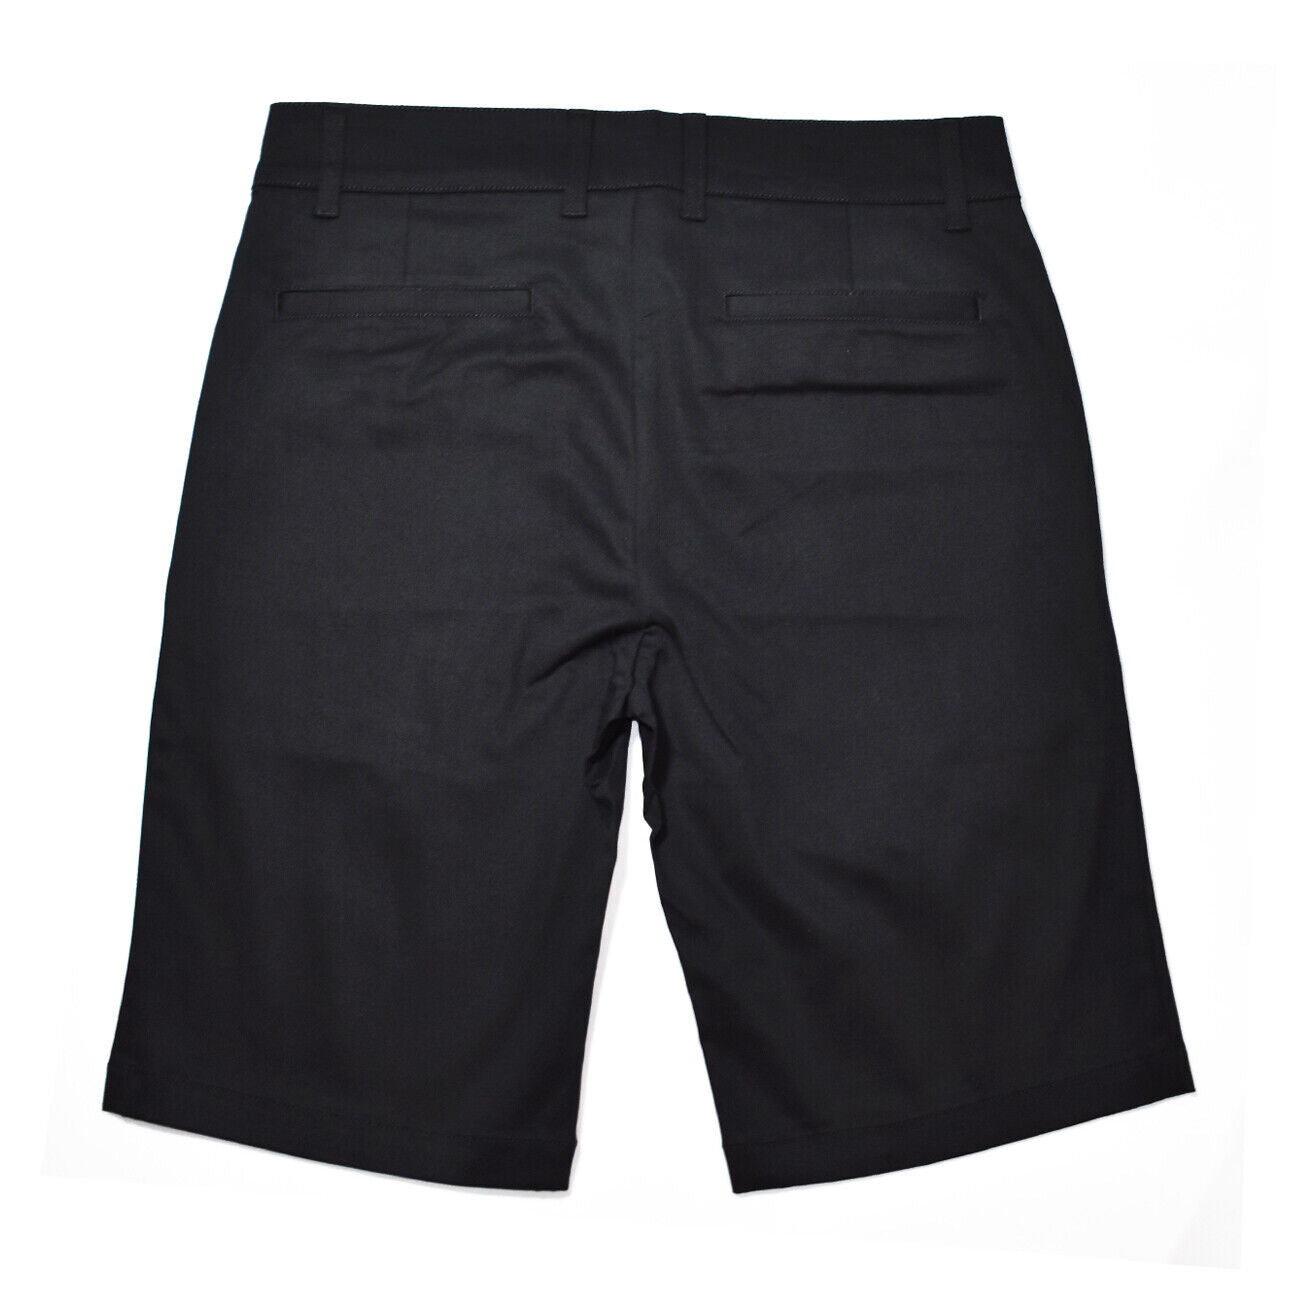 American Workwear Outdoor Shorts - Black Relaxed Fit - Men's Size